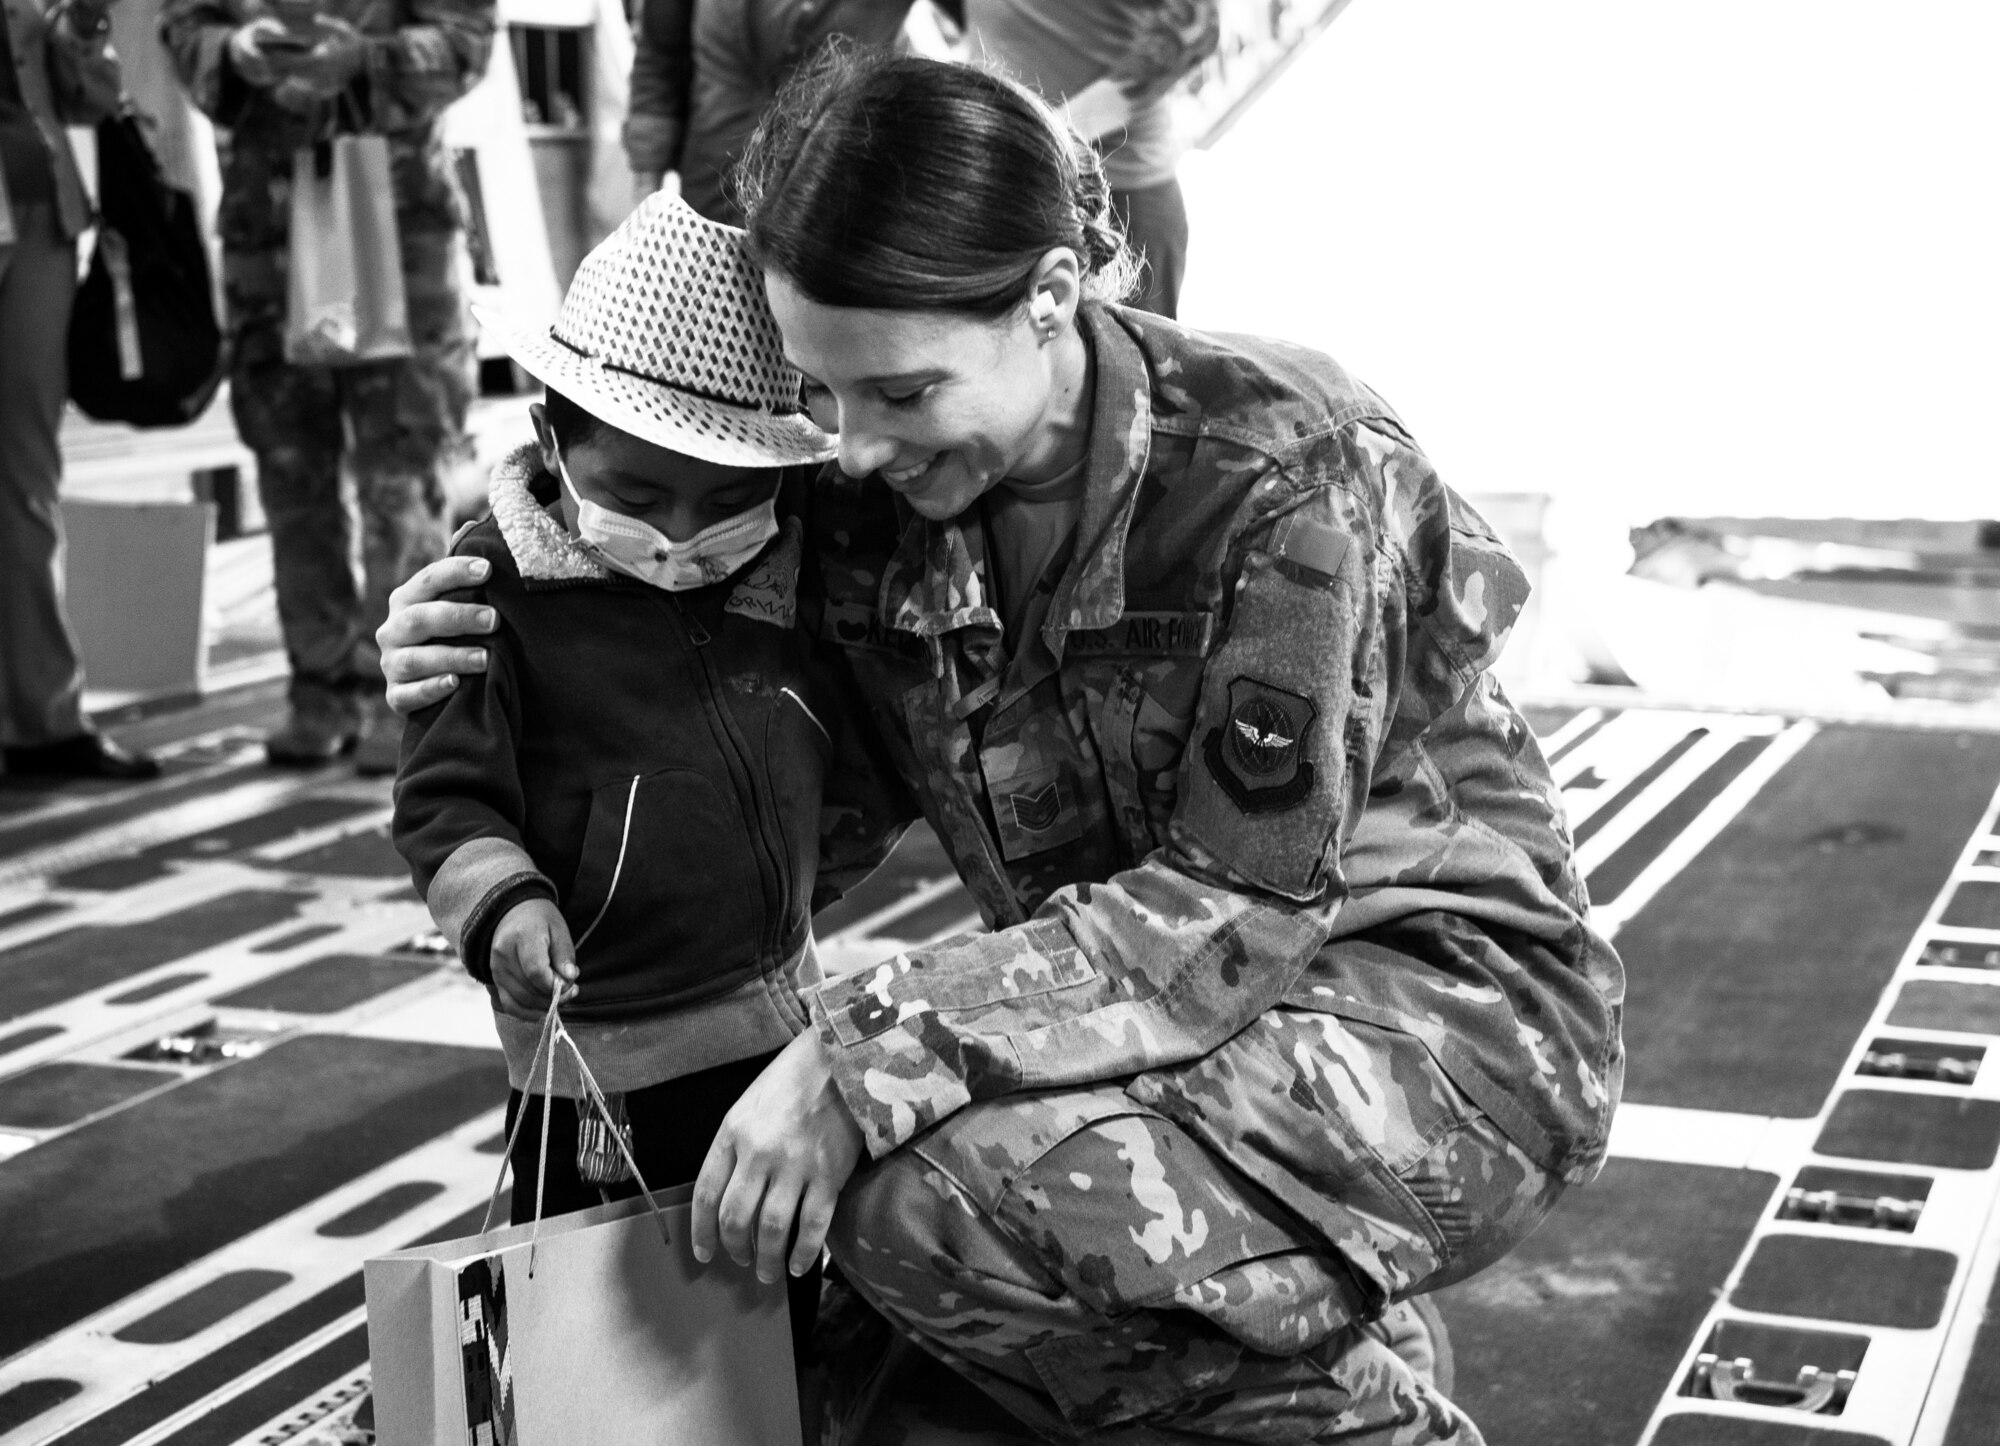 U.S. Air Force Tech. Sgt. Traci Keller, 60th Air Mobility Wing Public Affairs broadcast journalist, shares a moment with a local child after covering the delivery of emergency response vehicles through the Denton Program at La Aurora International Airport, Guatemala City, Guatemala, April 20, 2018. The Denton Program is a Department of Defense transportation program that moves humanitarian cargo, donated by U.S. based Non-Governmental Organizations to developing nations to ease human suffering. The emergency vehicles were donated by the Mission of Love Foundation, they are the largest user of the Denton Program, having delivered medical, relief and humanitarian supplies to needy communities throughout the world. (U.S. Air Force Photo by Master Sgt. Joey Swafford)